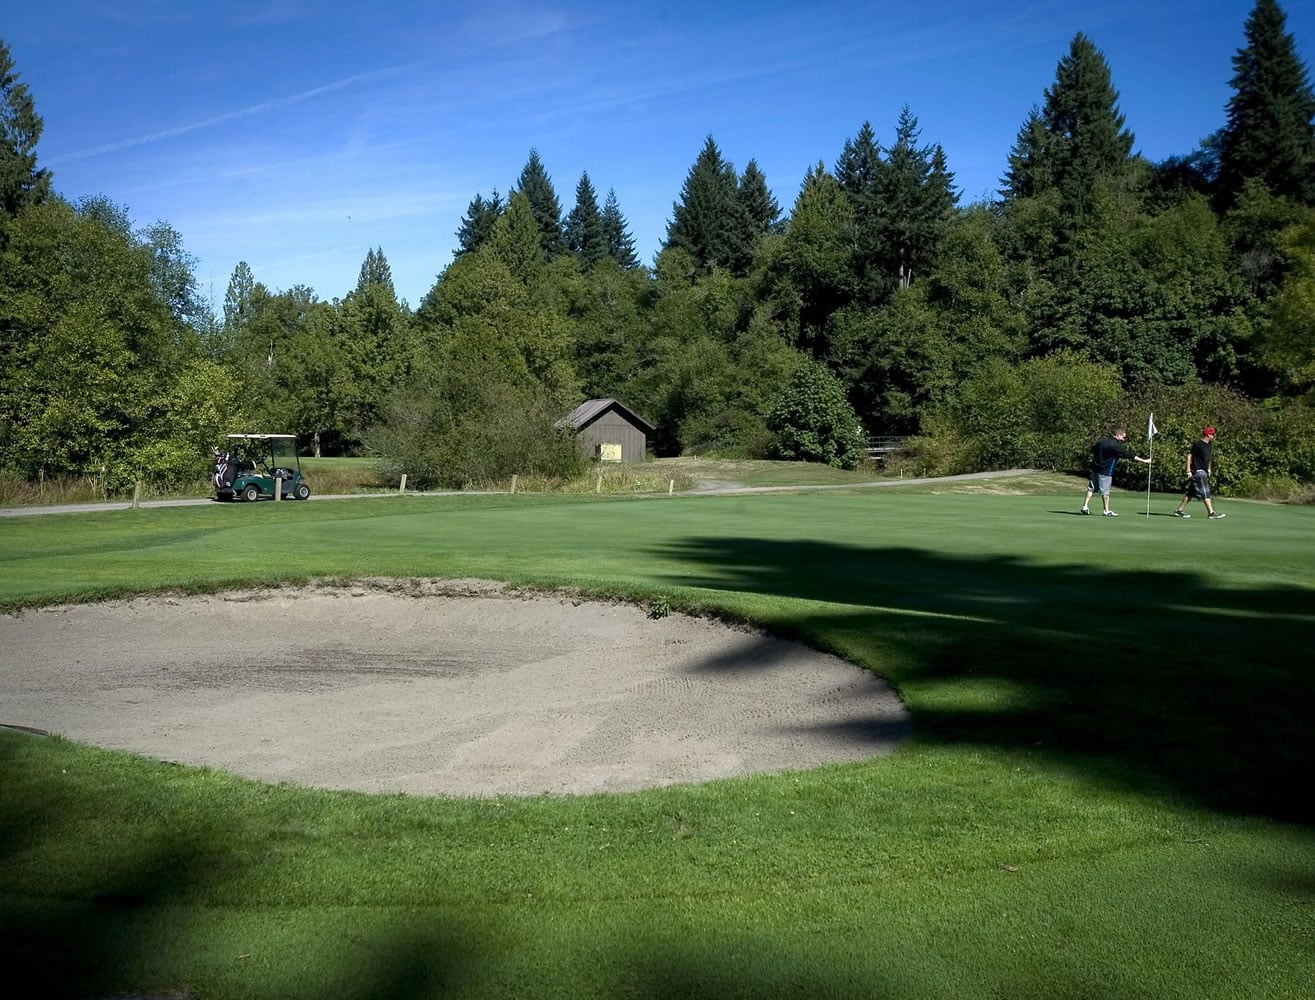 The Battle Ground City Council this week approved annexation of the Cedars on Salmon Creek golf course in Brush Prairie.